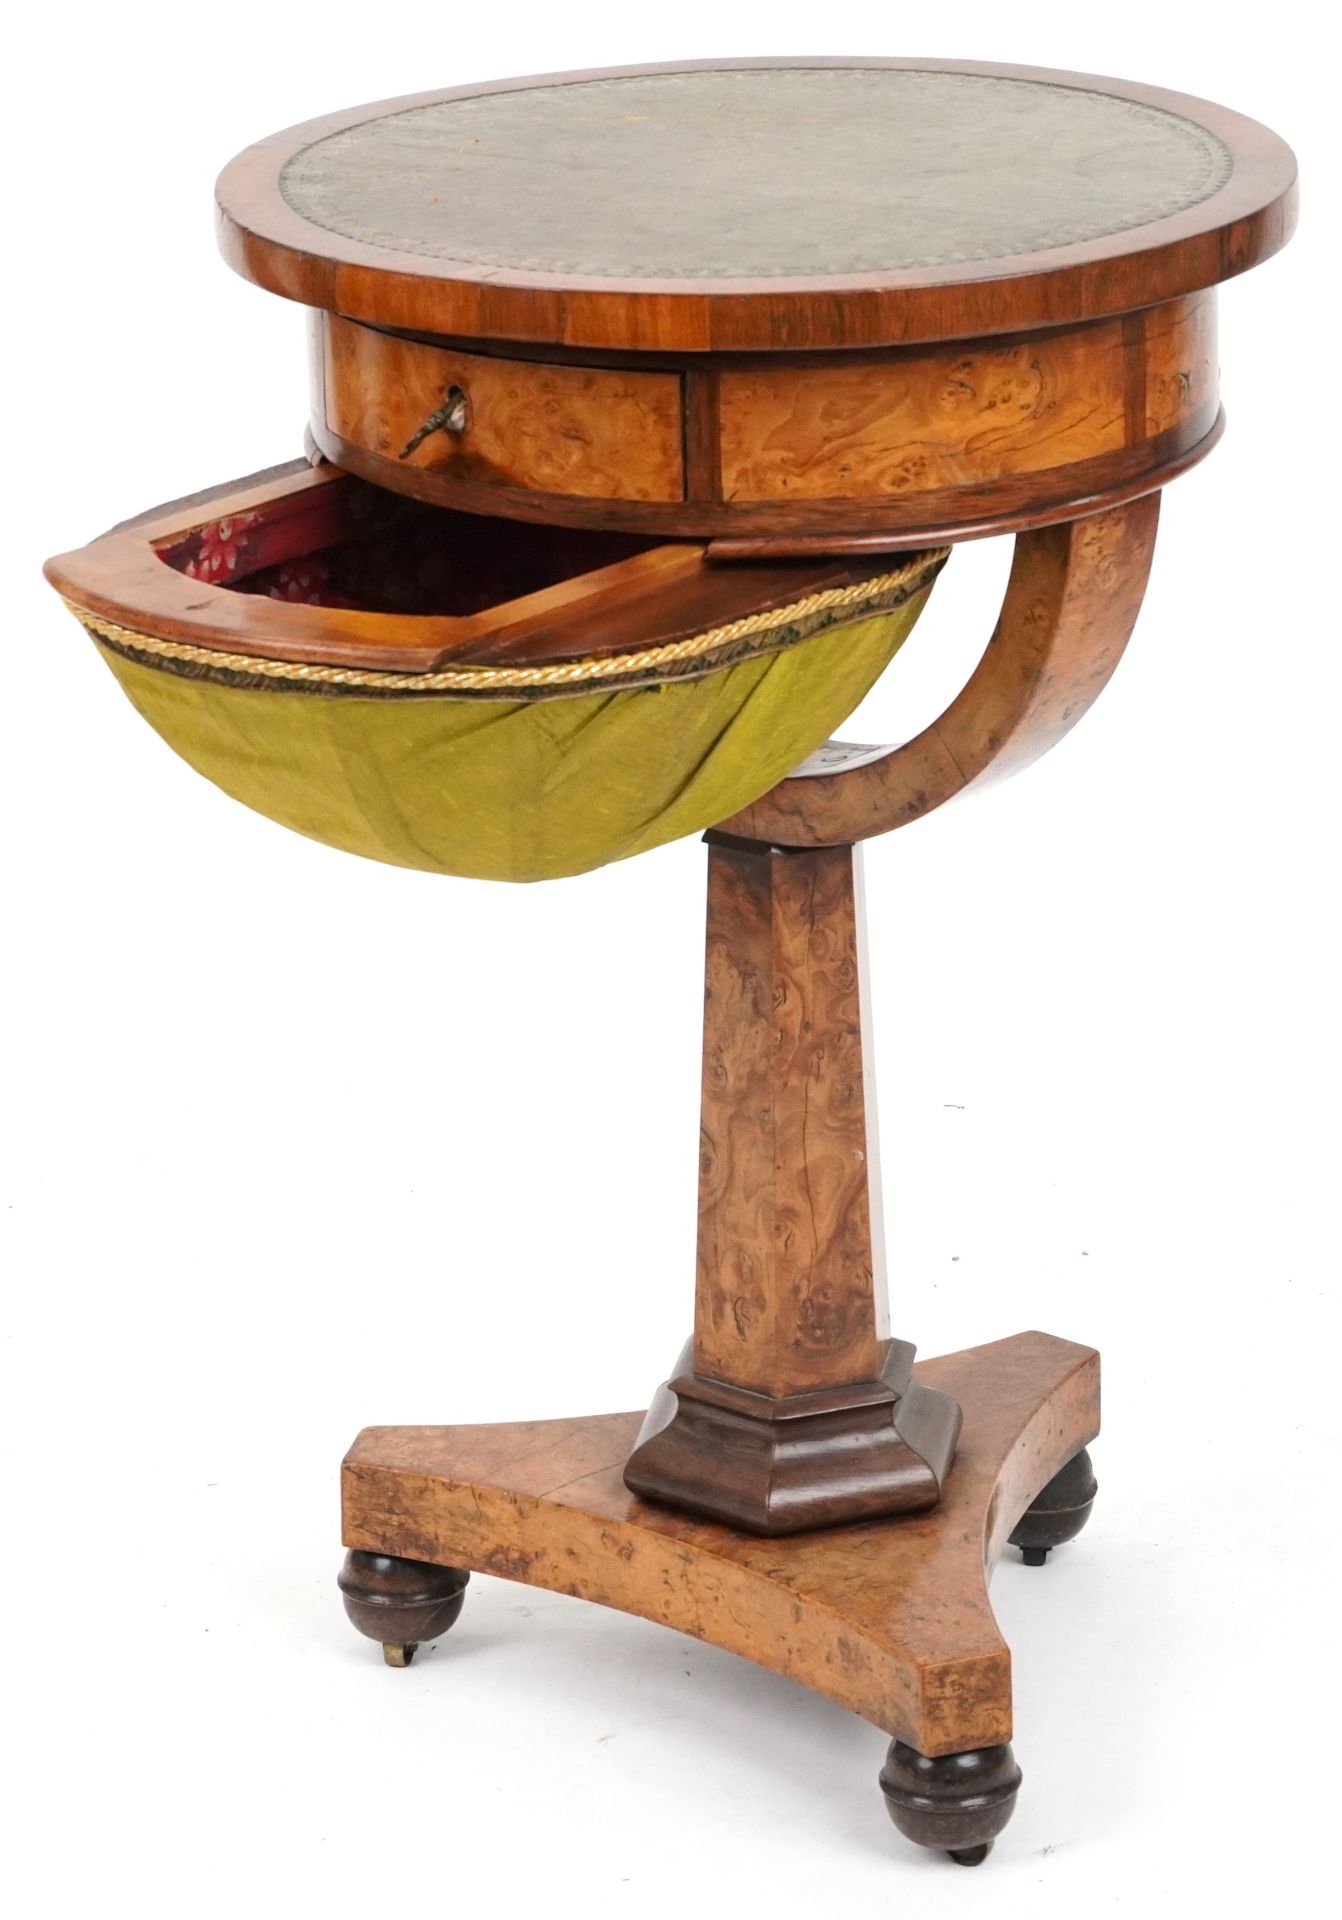 19th century continental figured walnut and rosewood sewing table with circular top, frieze - Image 2 of 5